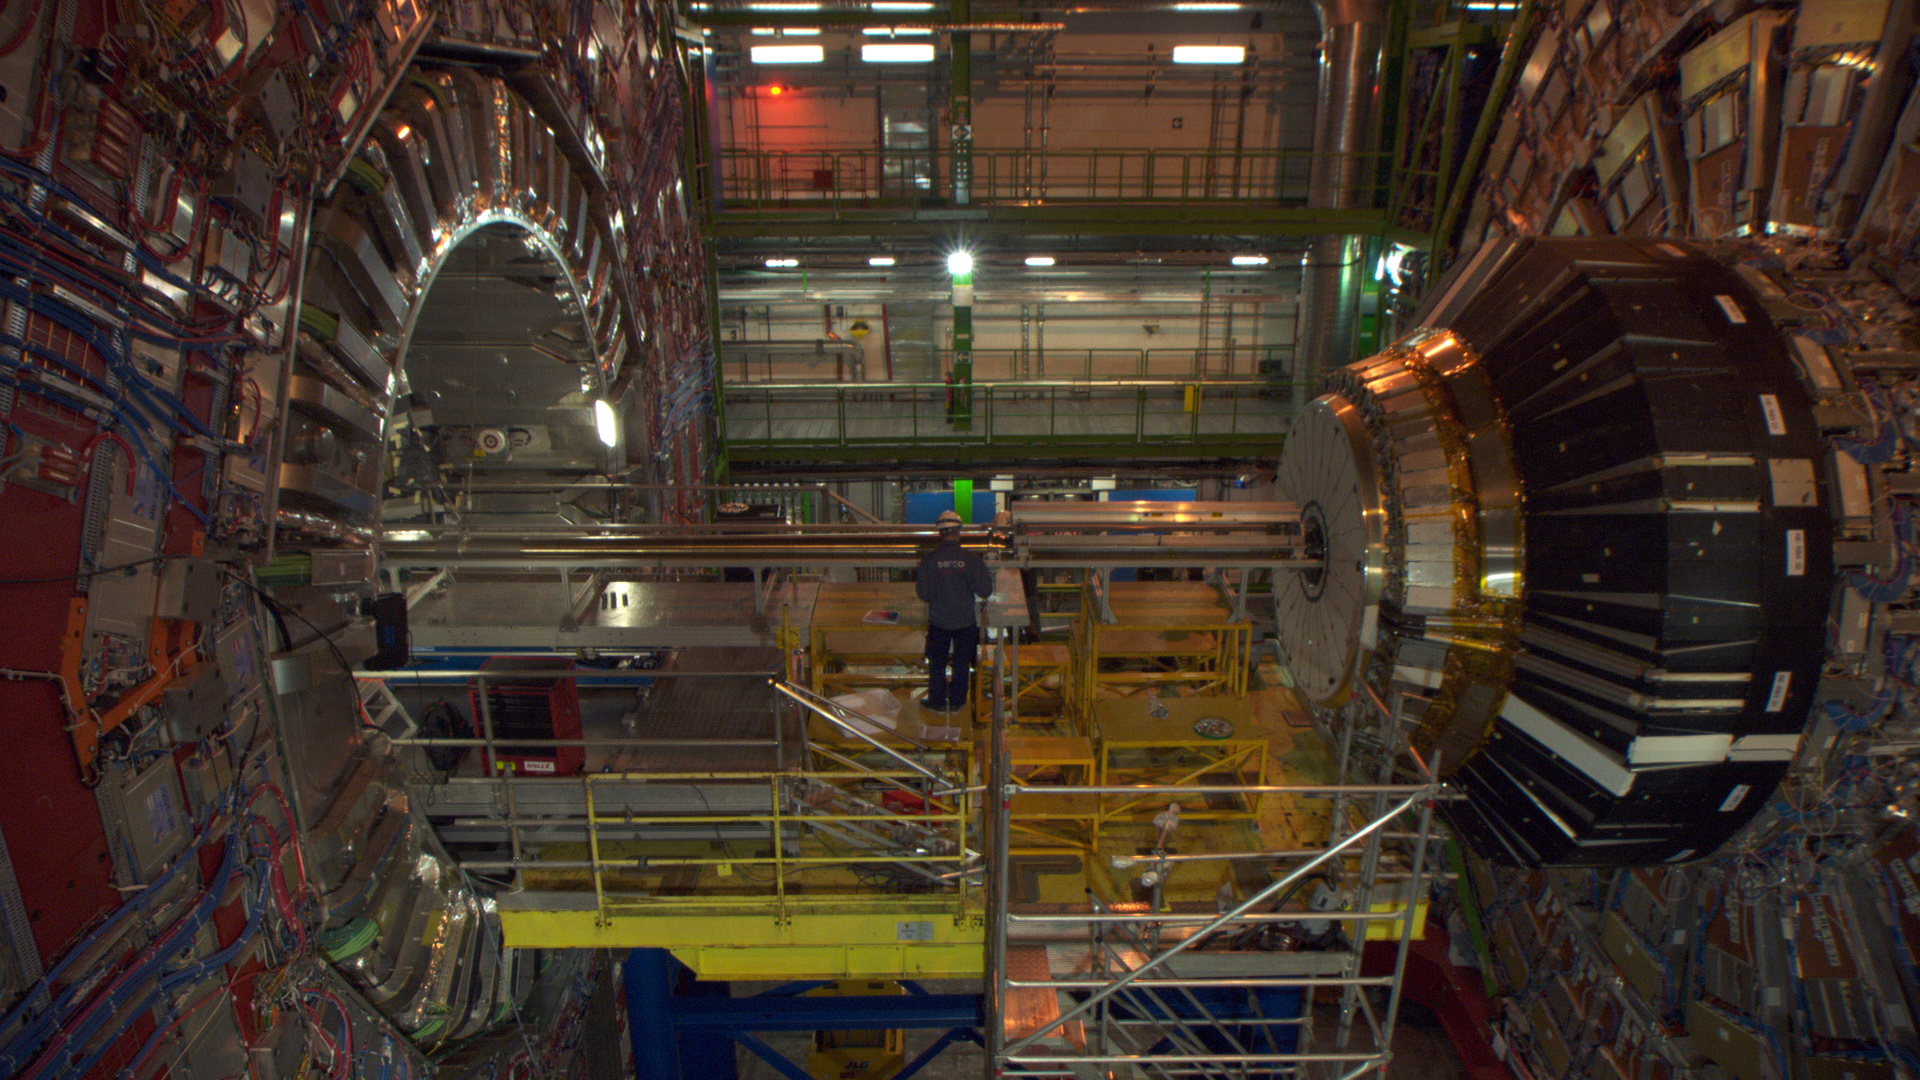 Worker inside the Large Hadron Collider project in Switzerland.

